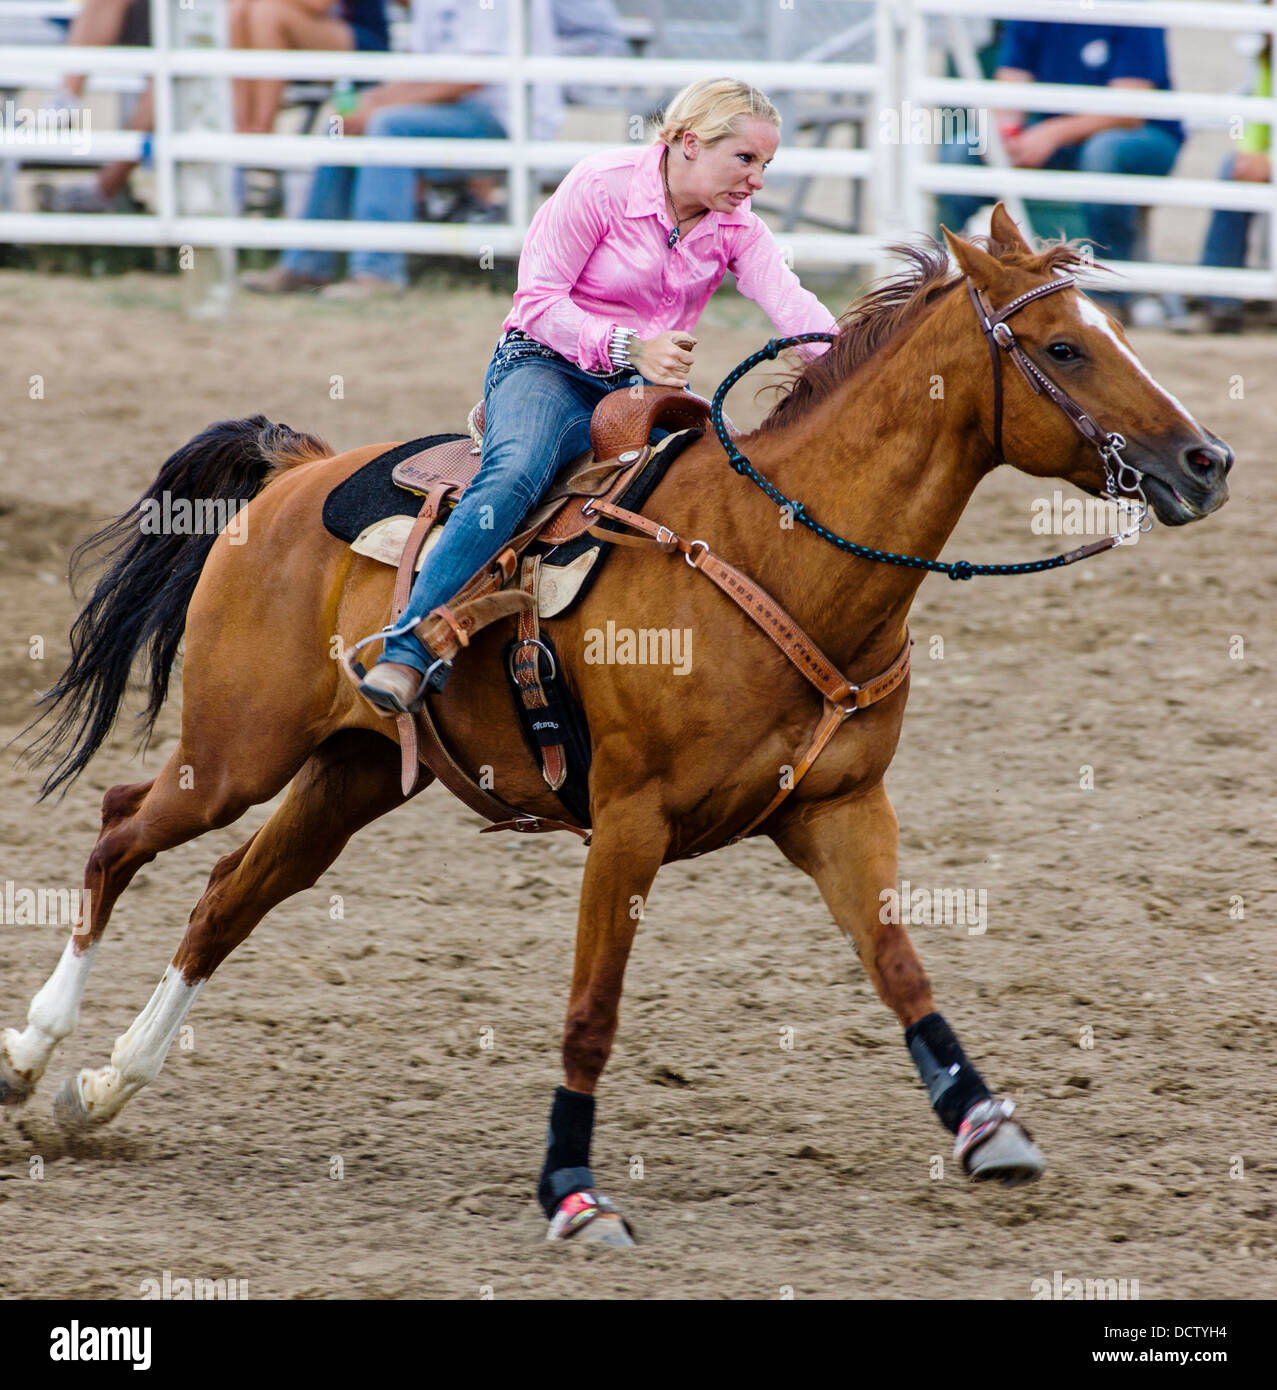 Cowgirl on horseback riding in the ladies barrel racing event, Chaffee County Fair & Rodeo Stock Photo